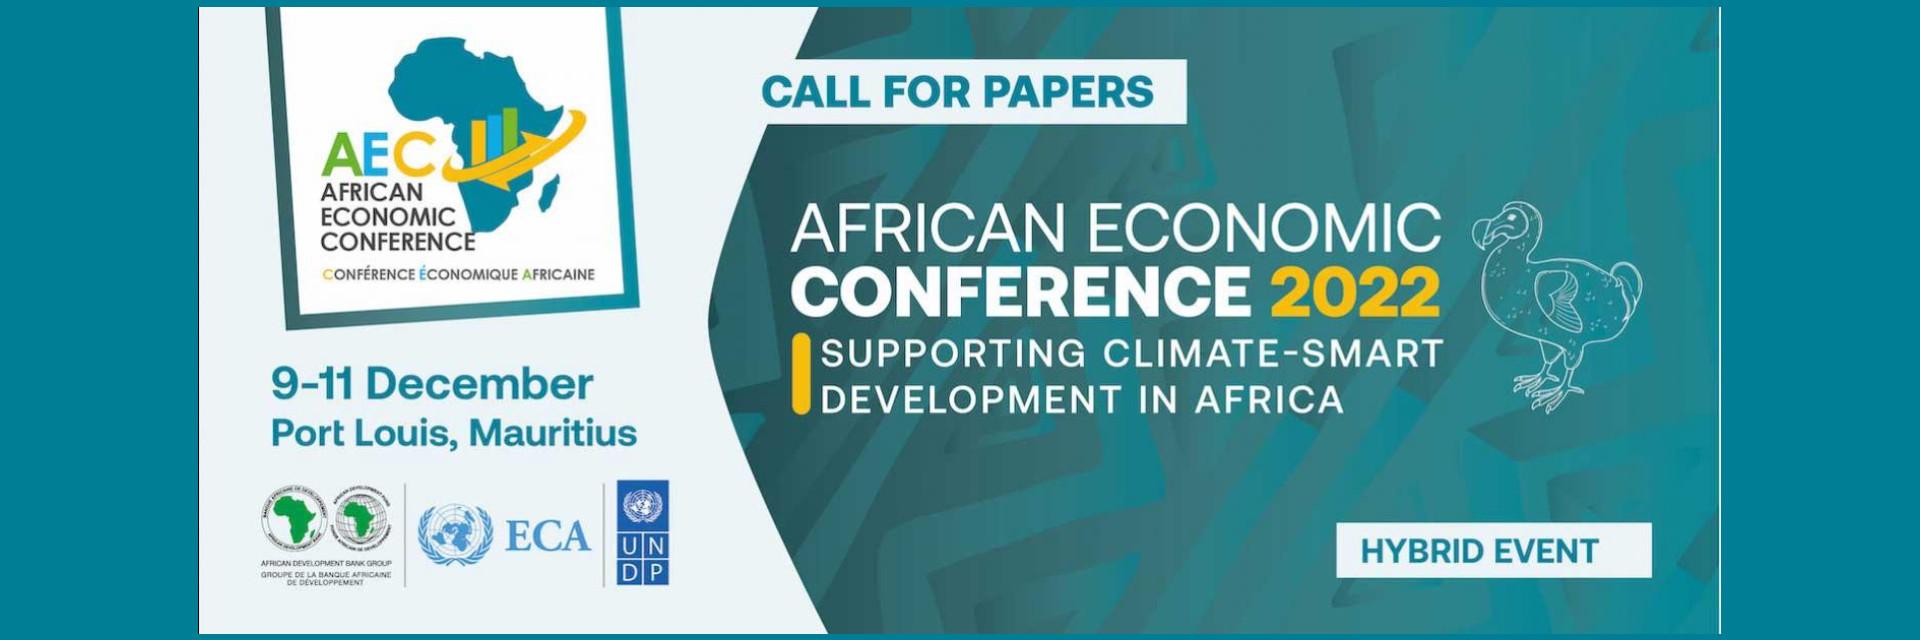 African Economic Conference invites researchers to submit papers for 2022 edition